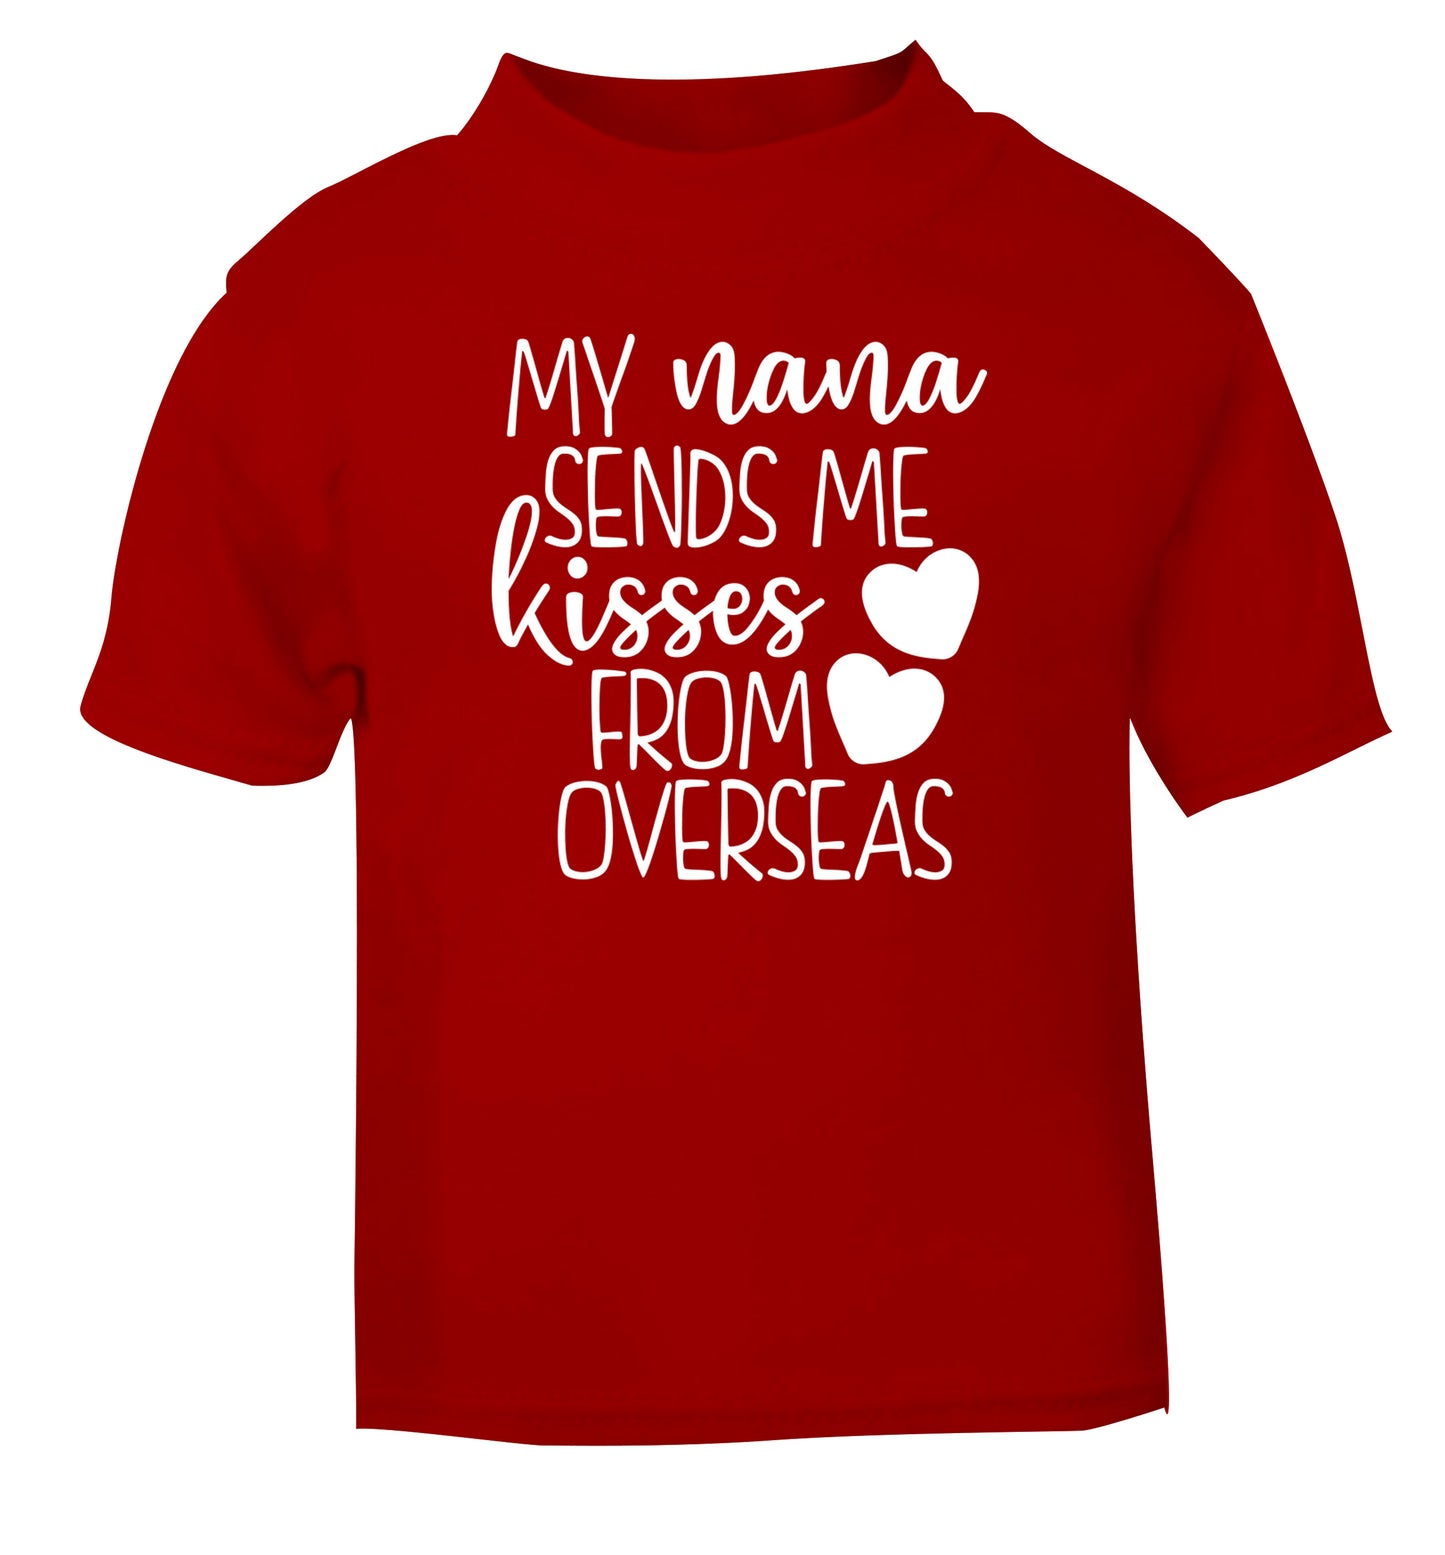 My nana sends me kisses from overseas red Baby Toddler Tshirt 2 Years